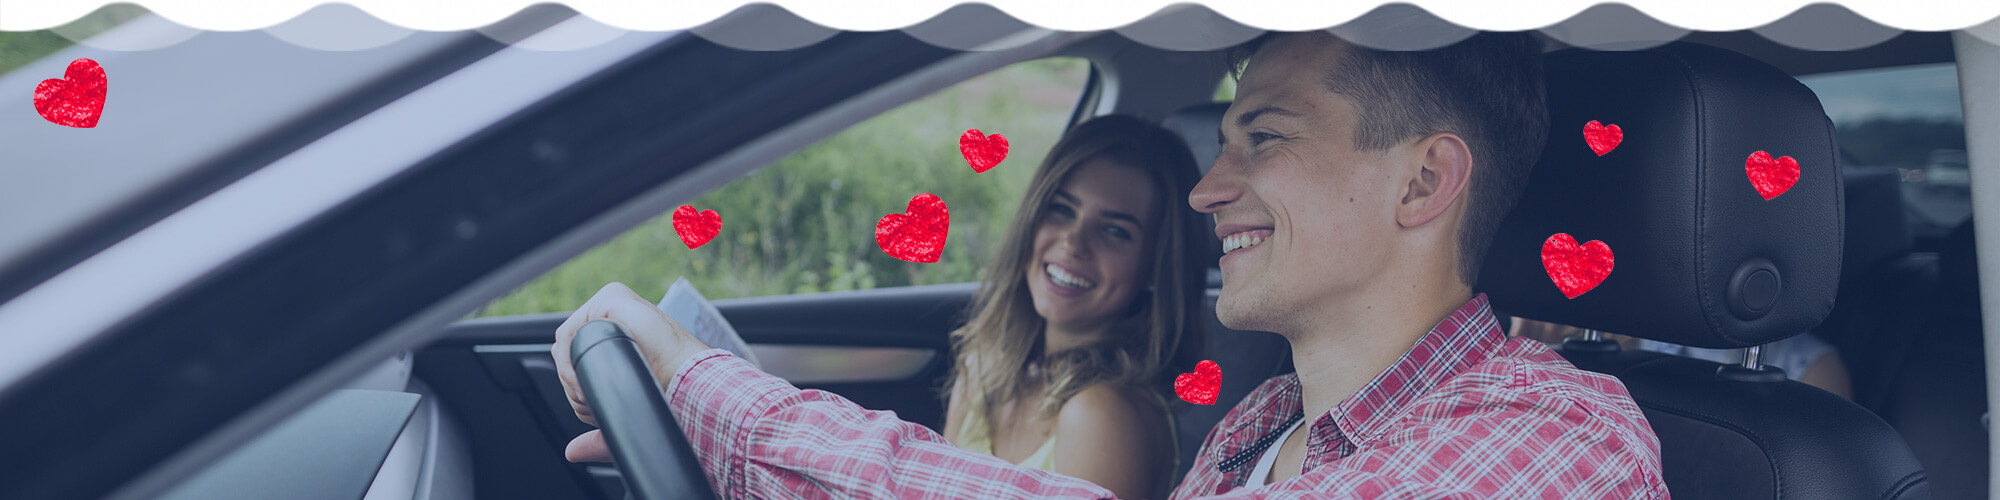 Man and woman smiling in car